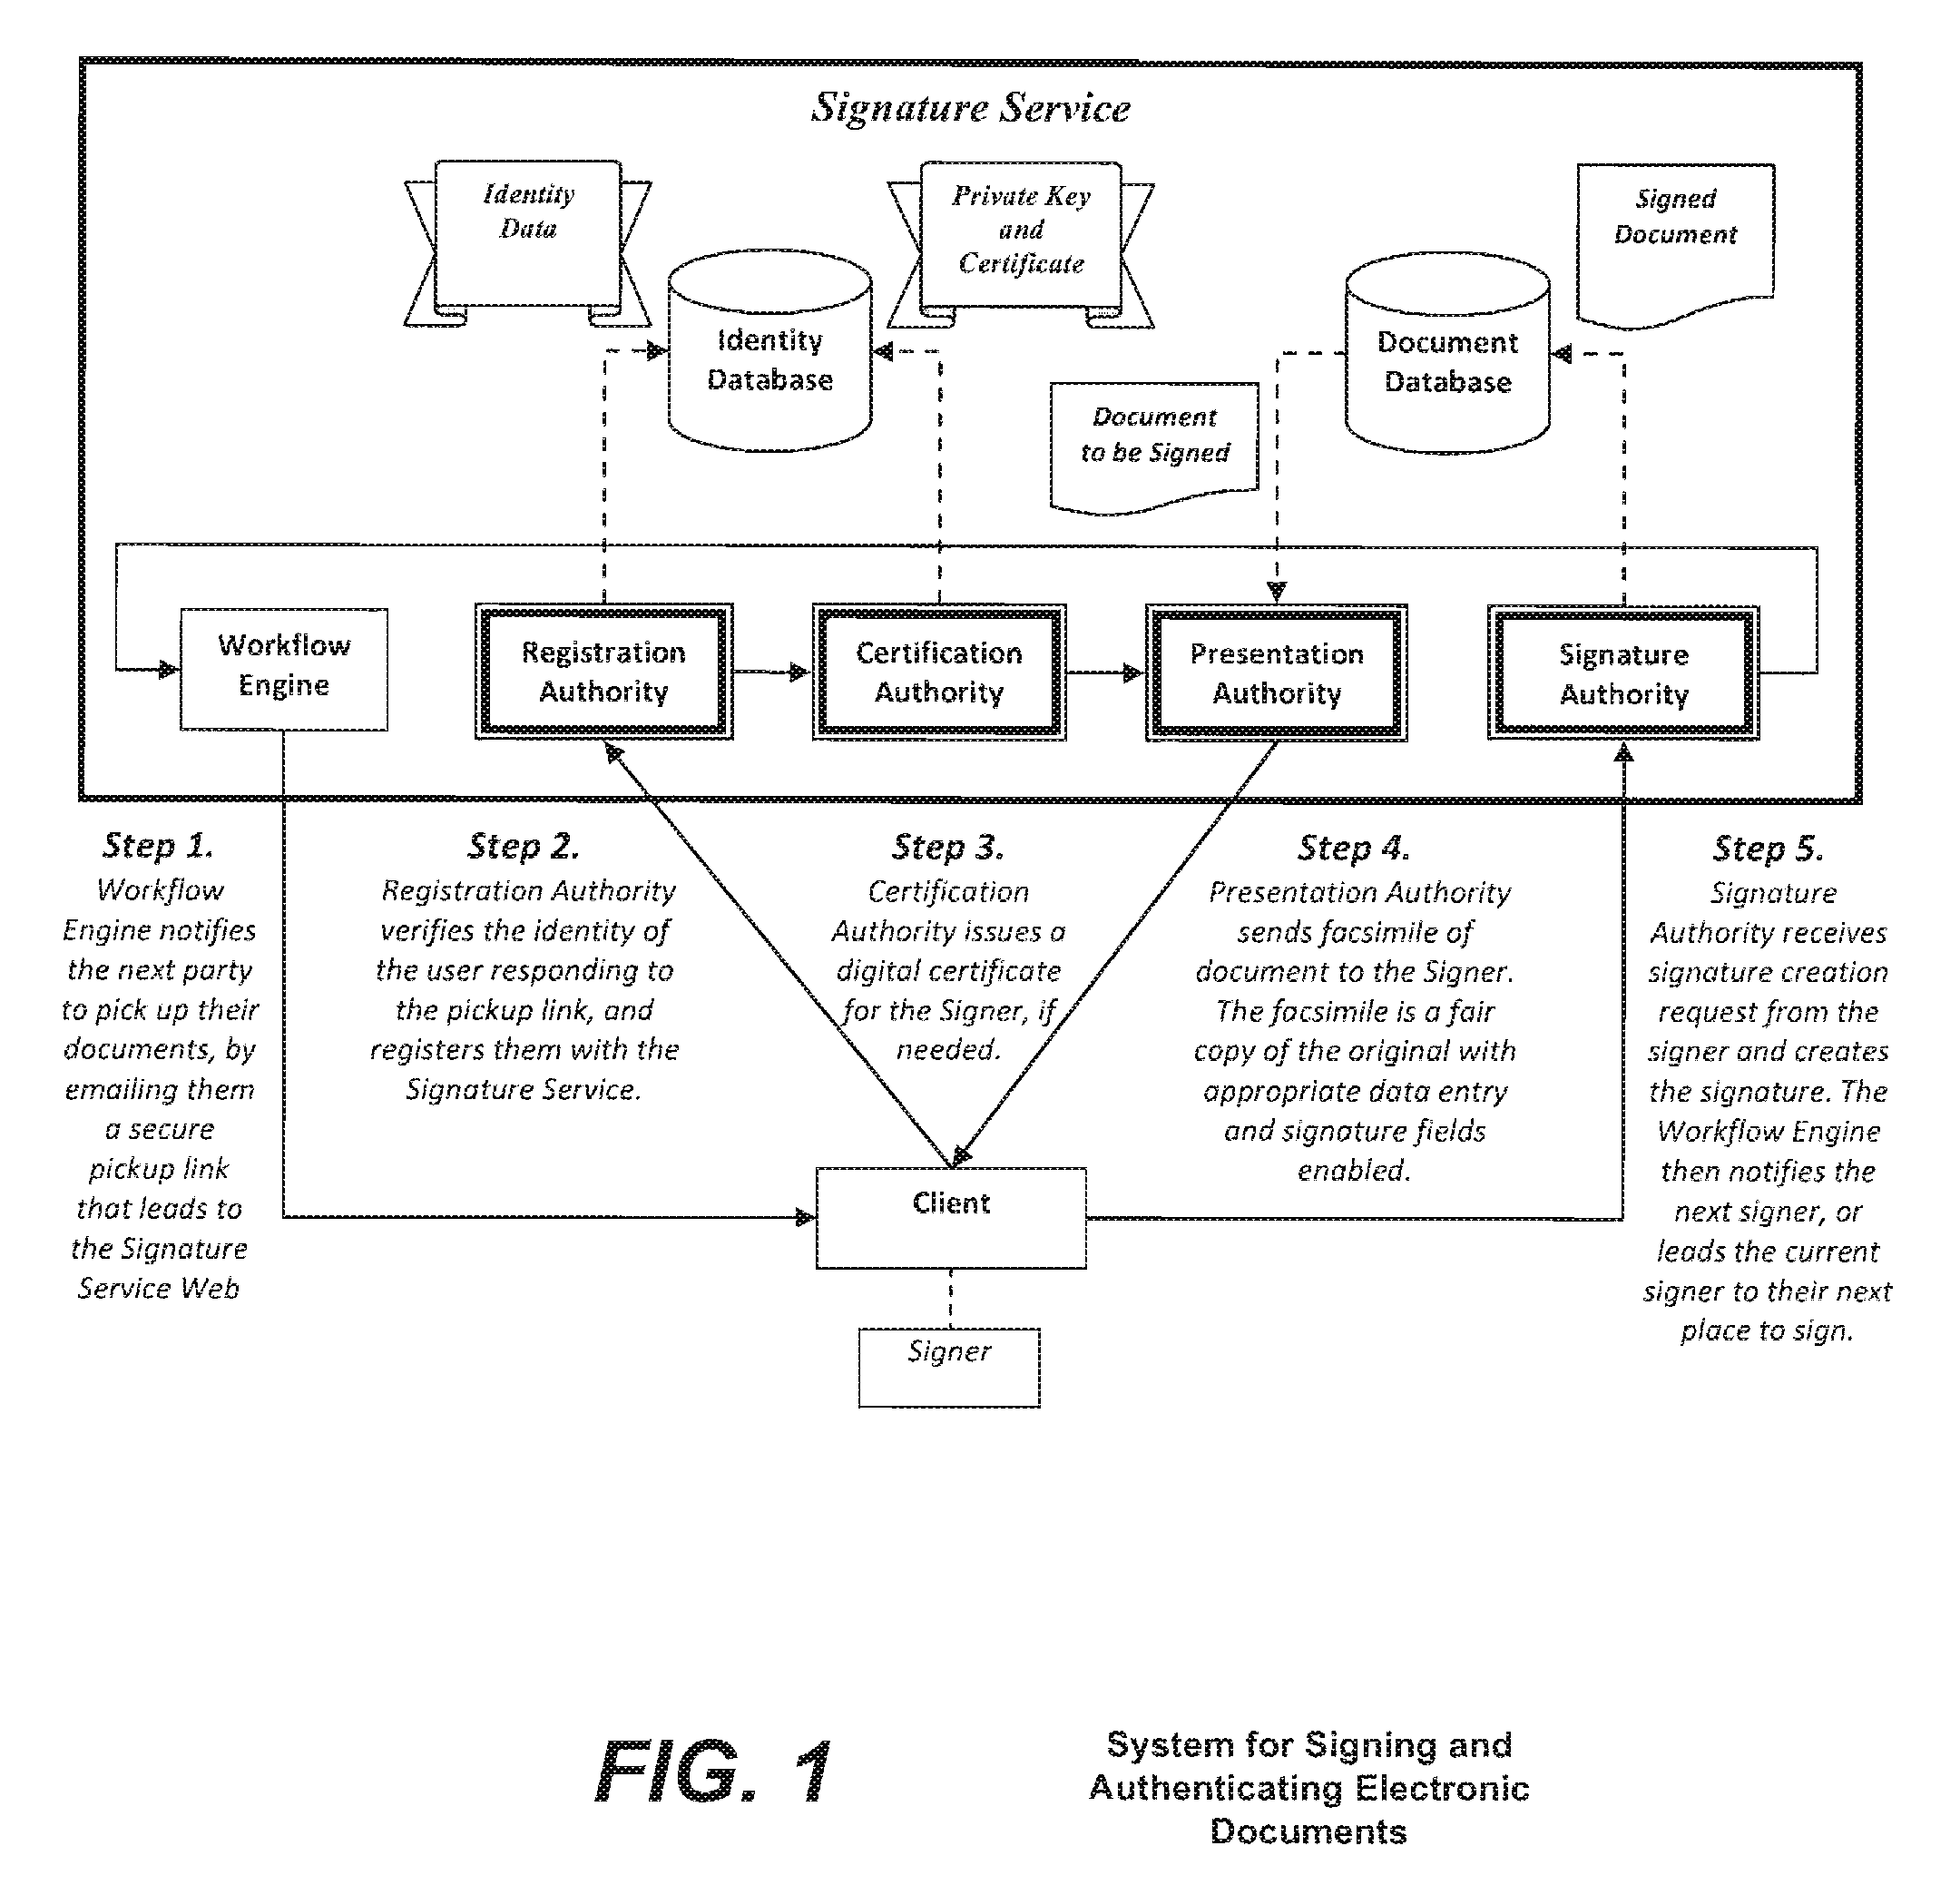 Method and system for signing and authenticating electronic documents via a signature authority which may act in concert with software controlled by the signer